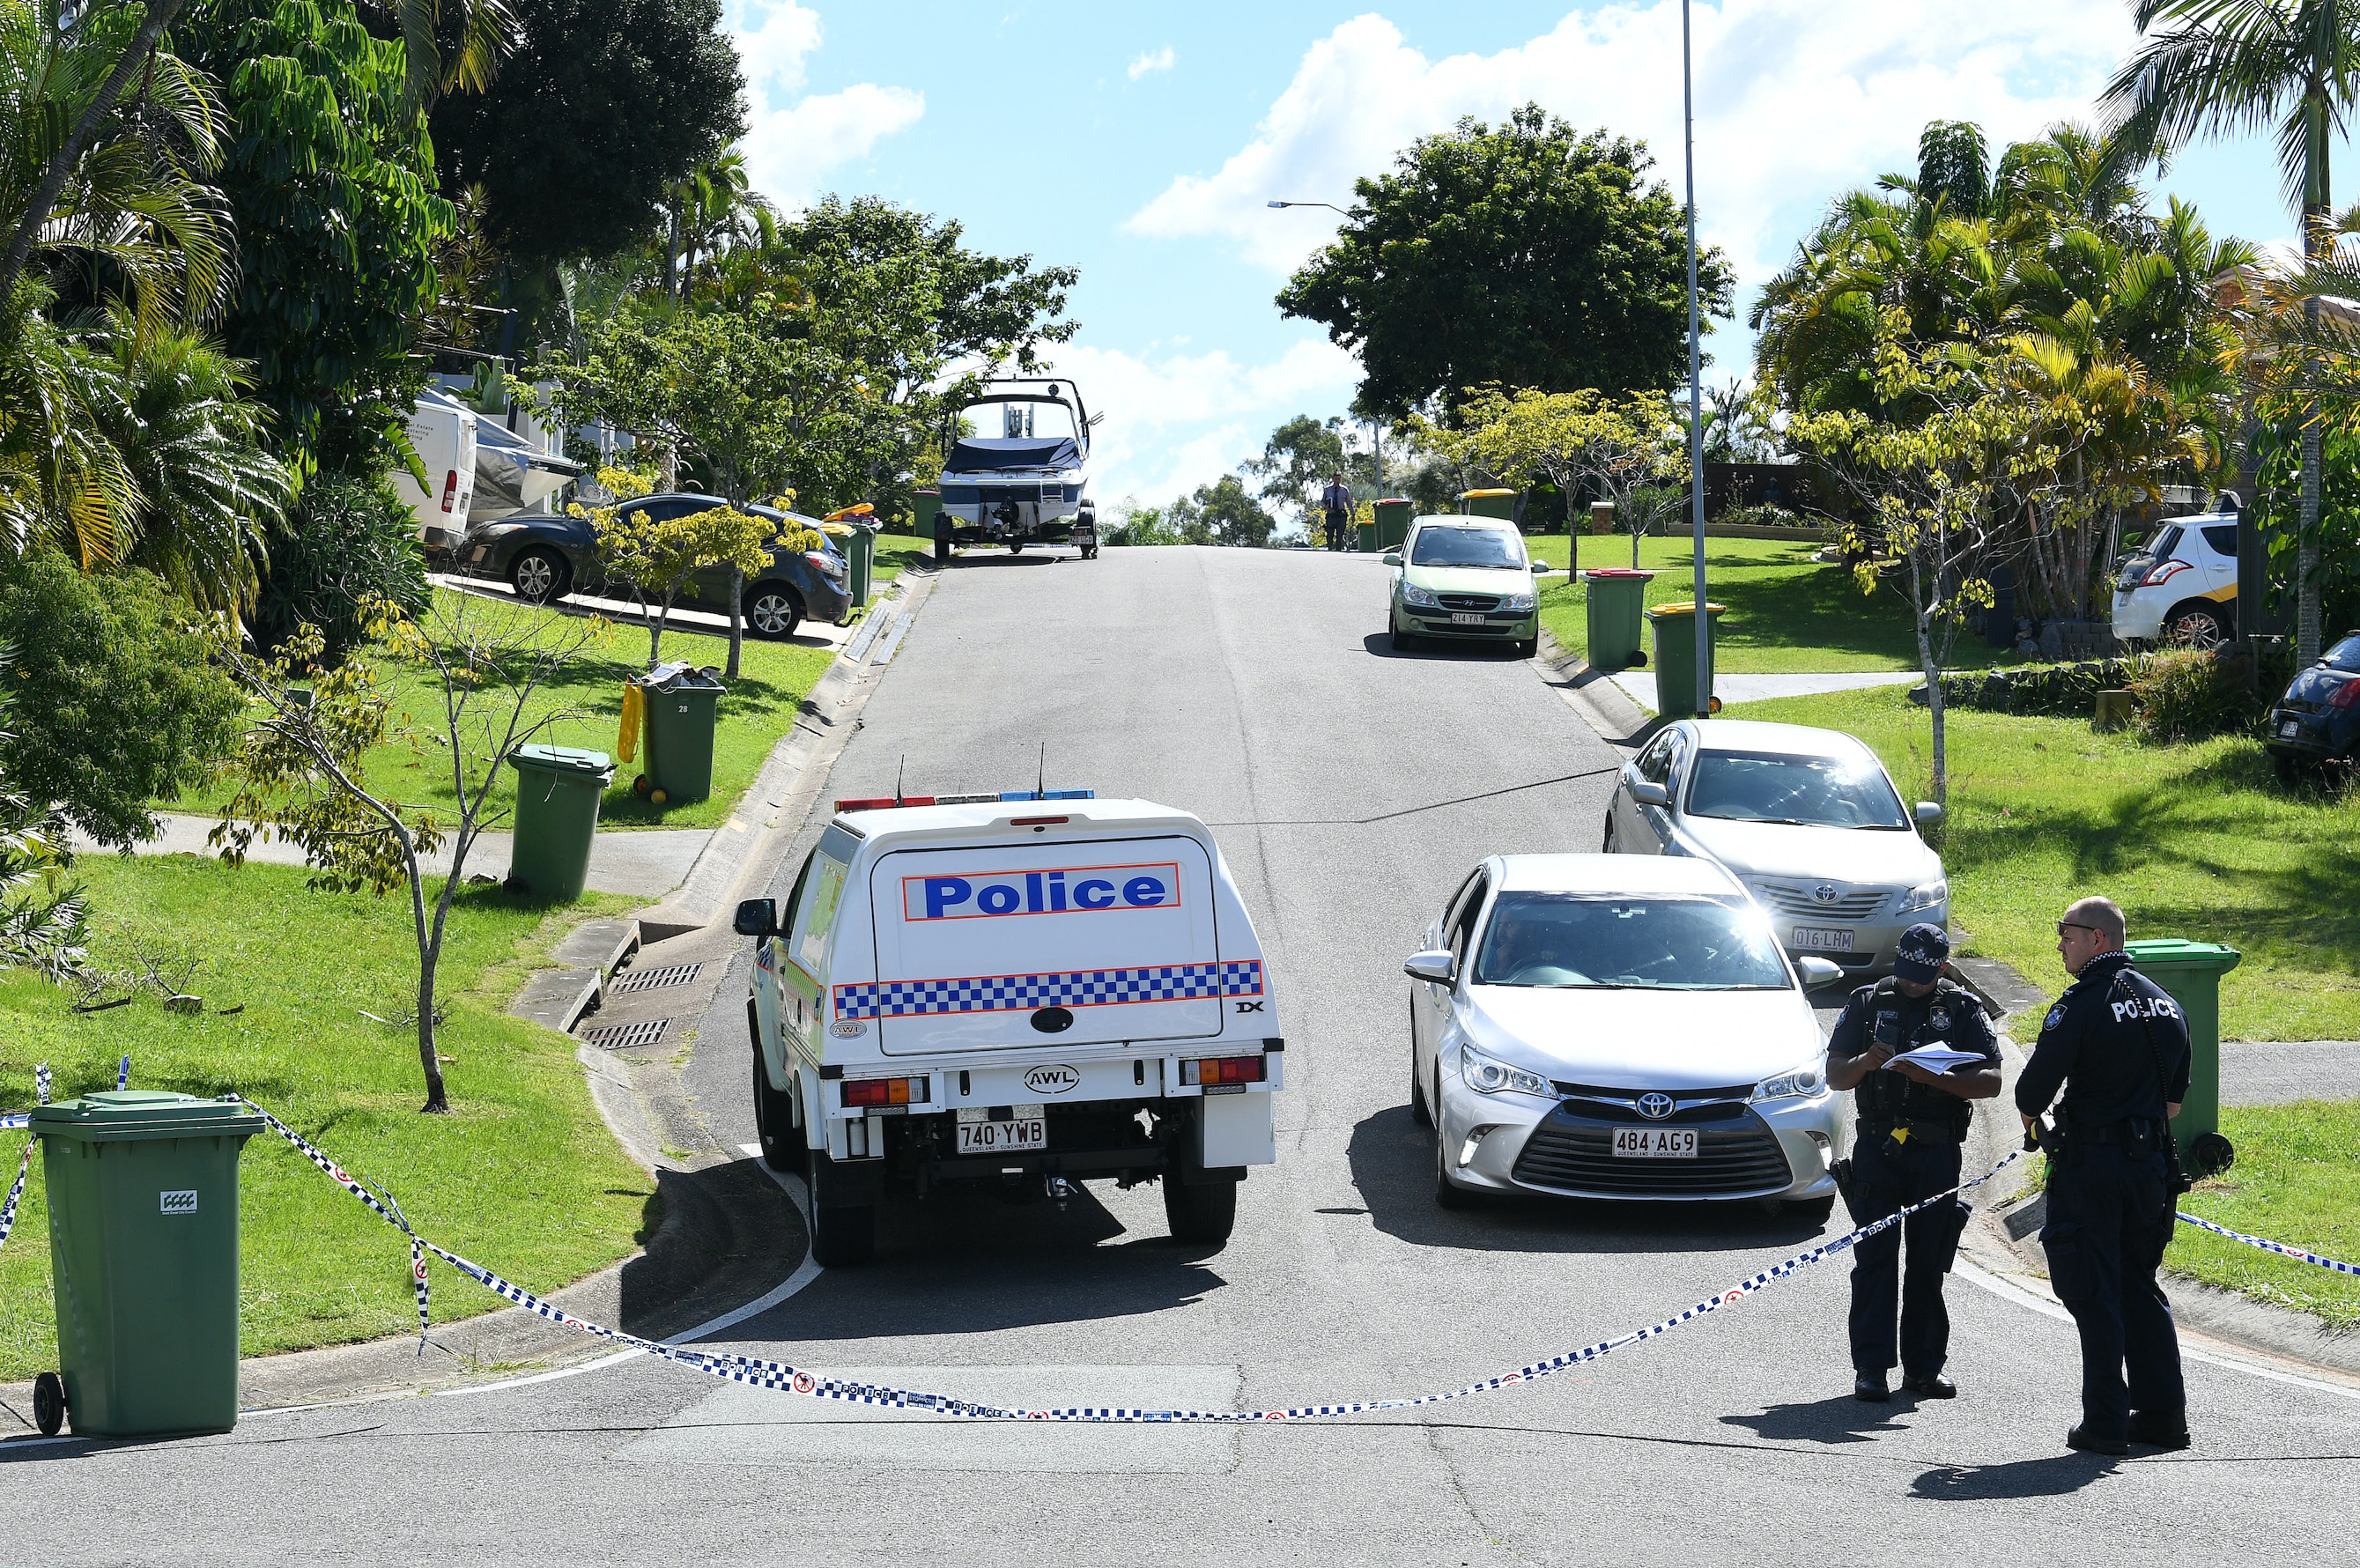 Police work near the crime scene in Arundel on the Gold Coast, Tuesday, 20 April, 2021.